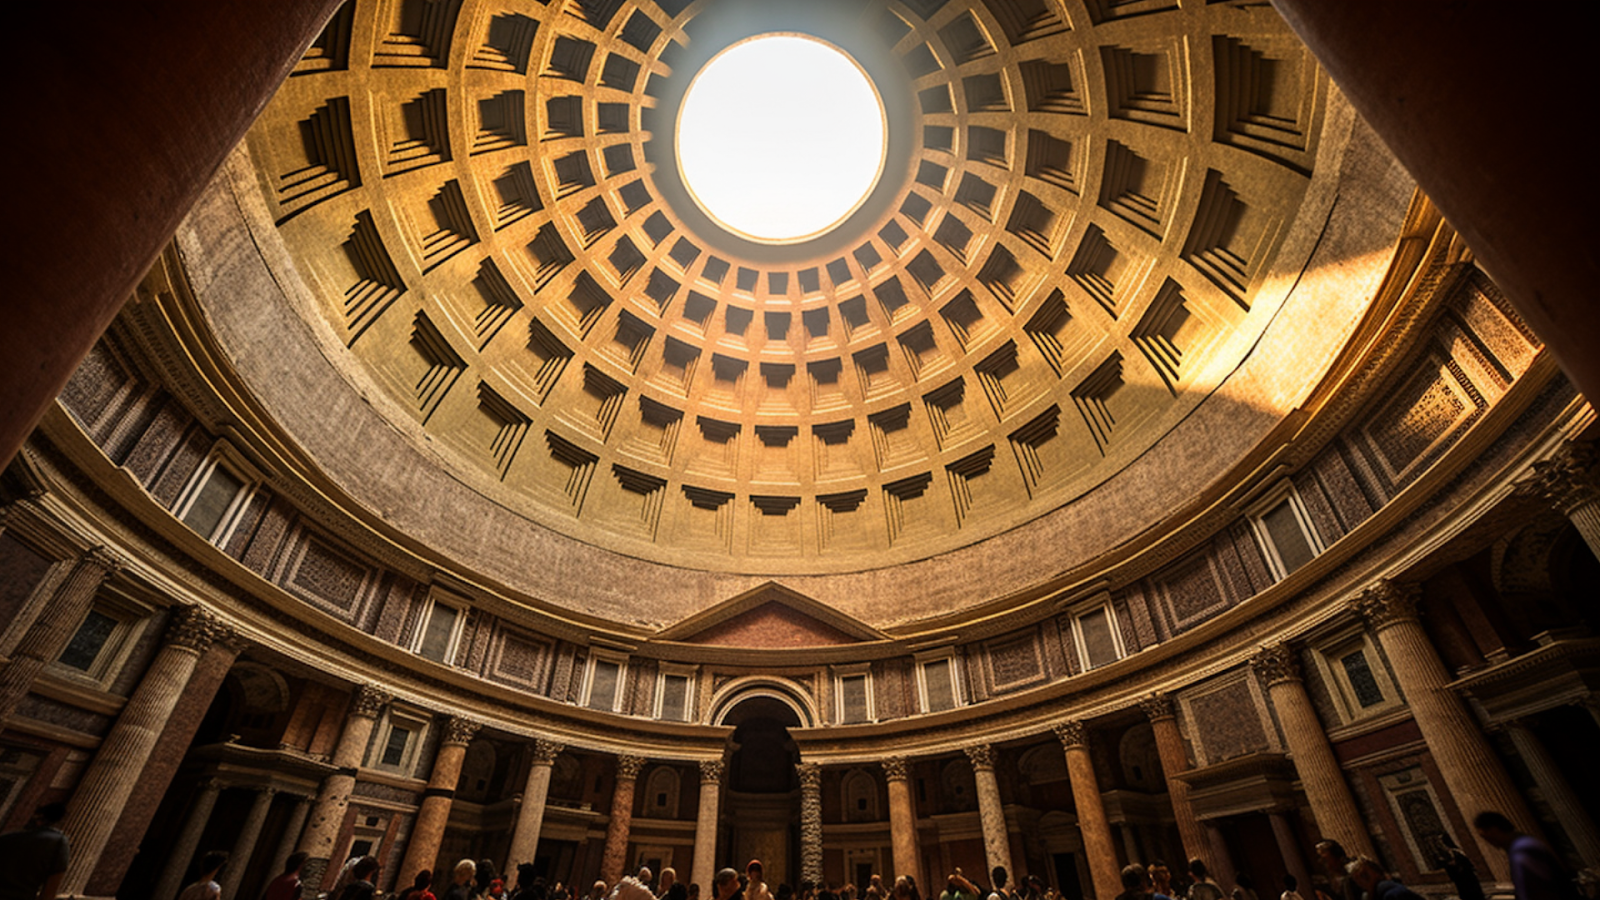 The ancient Pantheon in Rome, Italy, with its remarkable dome, a testament to historic architectural brilliance.